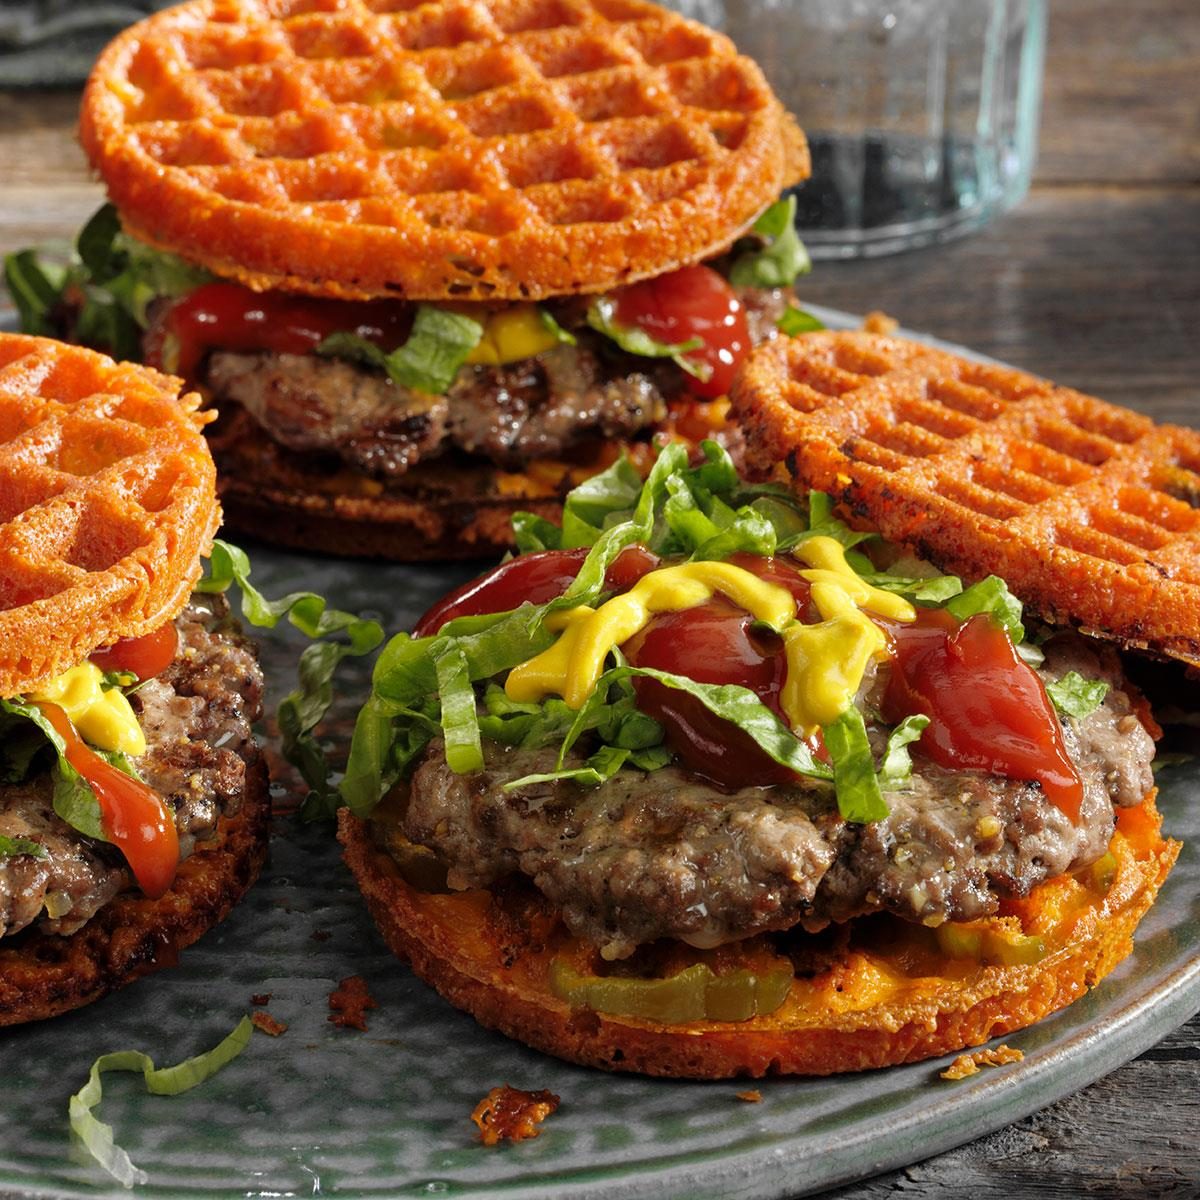 https://www.tasteofhome.com/wp-content/uploads/2023/03/Low-Carb-Cheesy-Cheeseburgers_EXPS_RC23_271127_P2_MD_02_01_12b.jpg